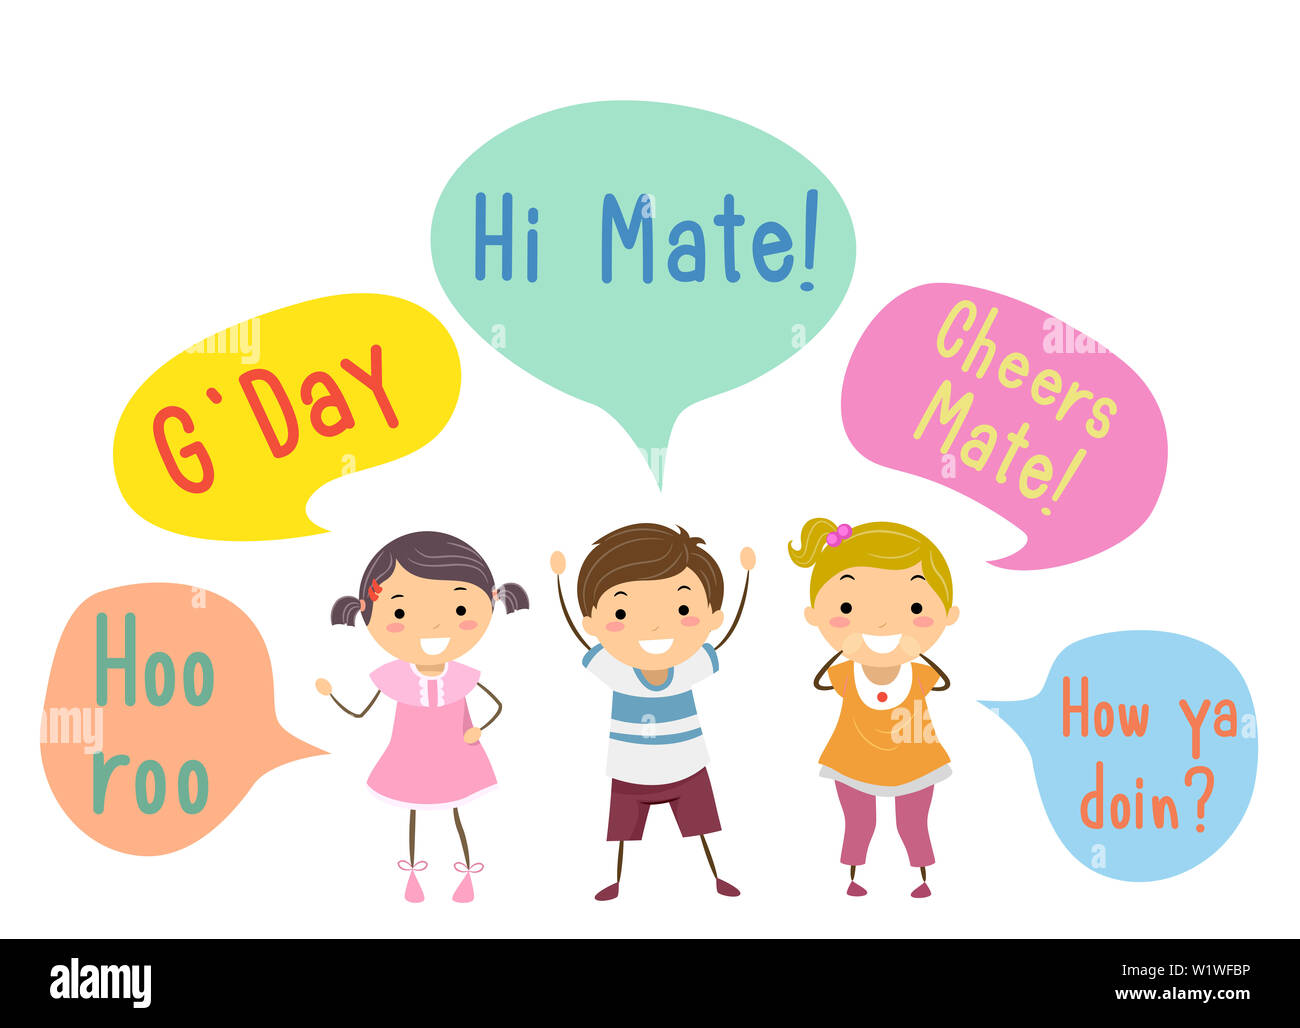 Illustration of Stickman Kids Talking, Waving with Speech Bubbles with  Greetings in Australia Stock Photo - Alamy